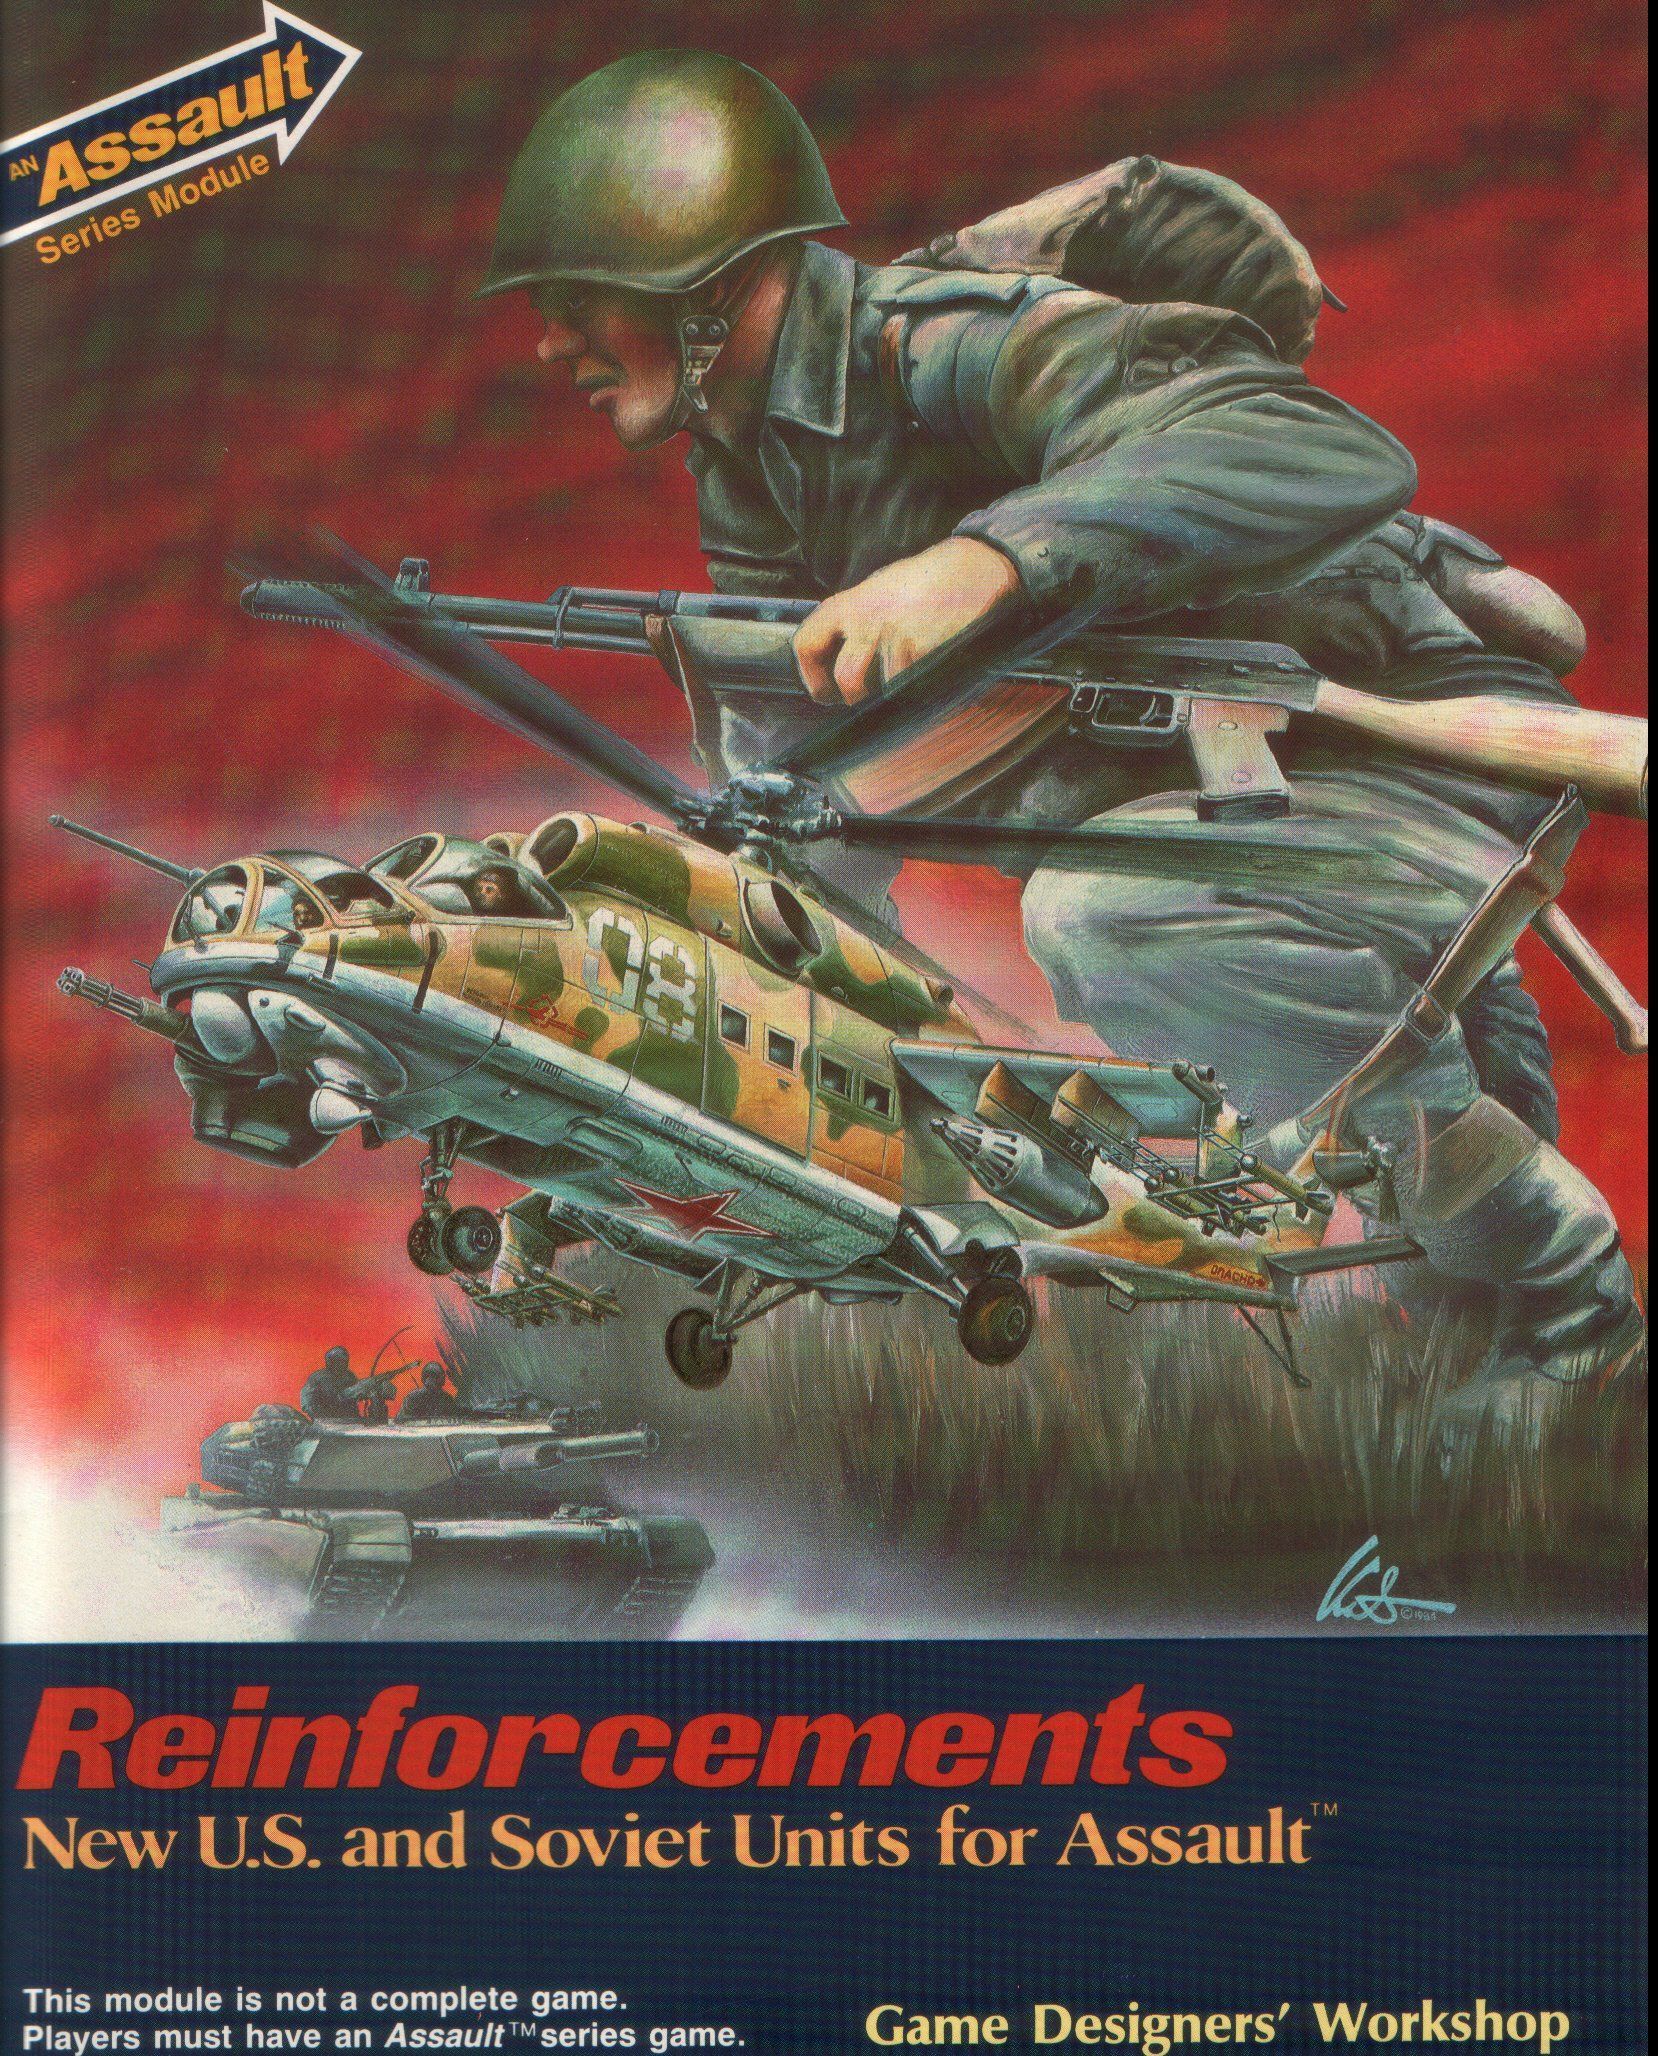 Reinforcements: New U.S. and Soviet Units for Assault